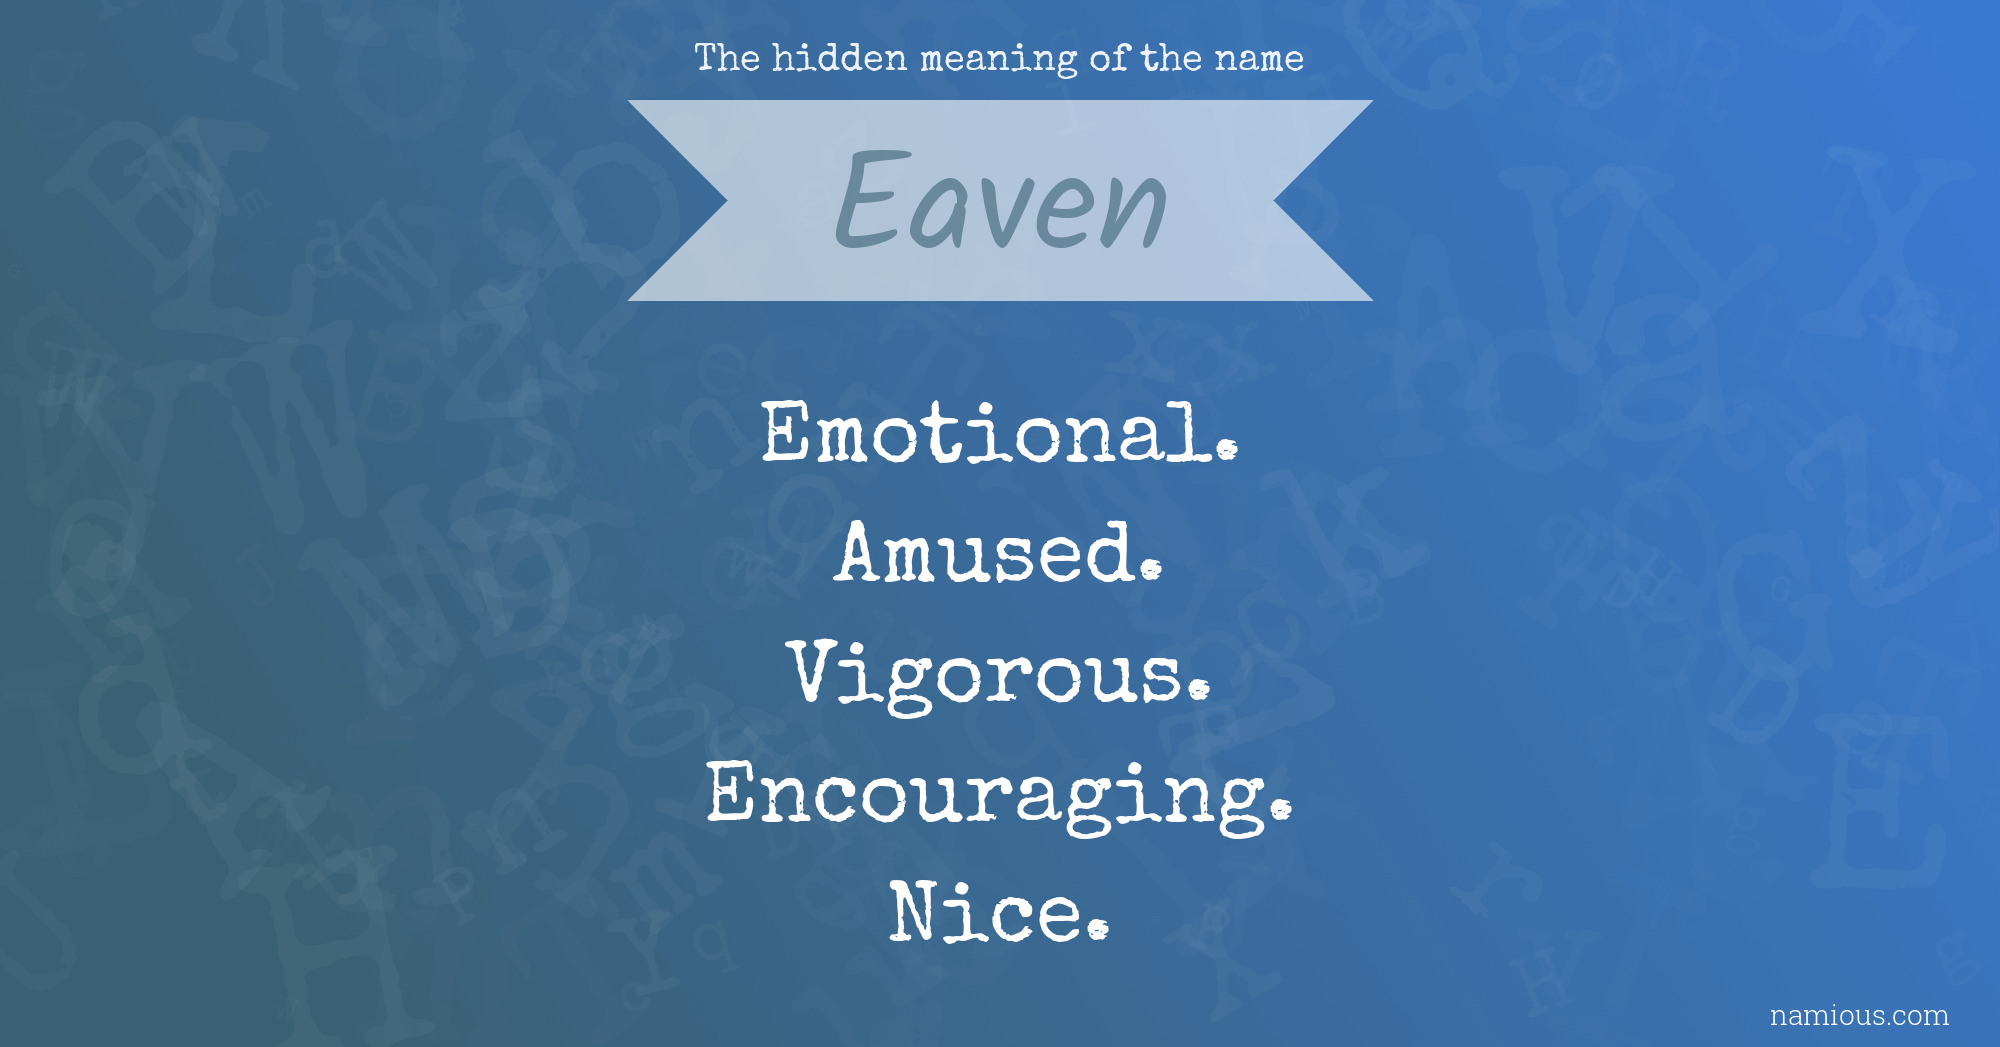 The hidden meaning of the name Eaven